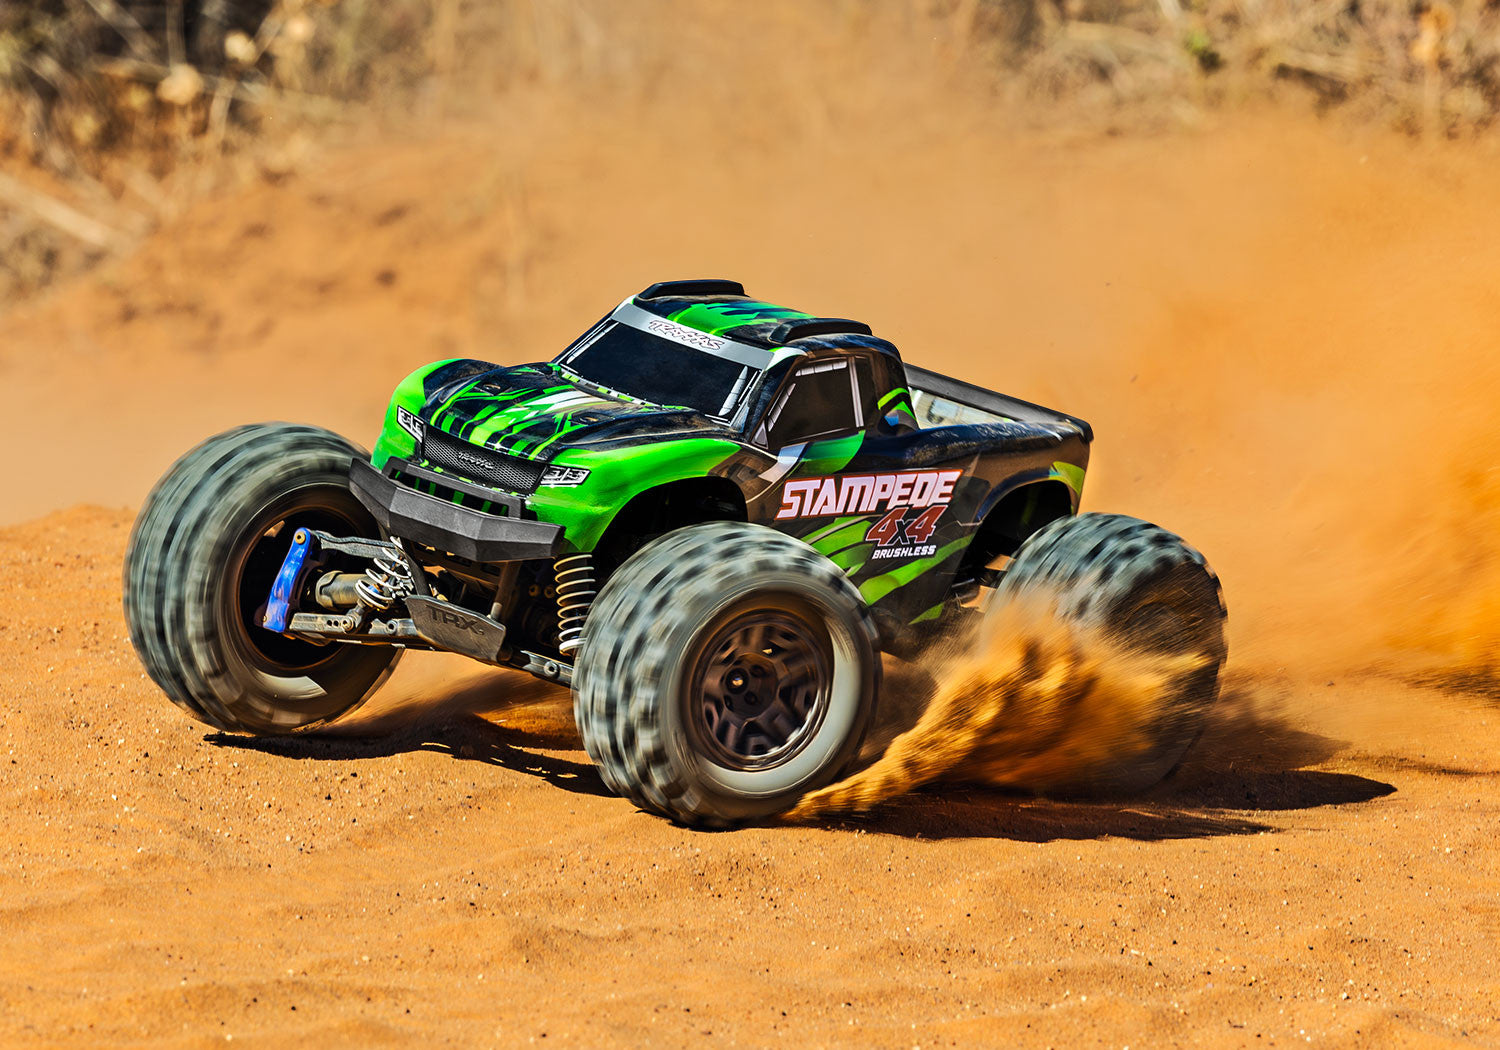 Traxxas Stampede 4x4 BL-2s RTR 67154-4